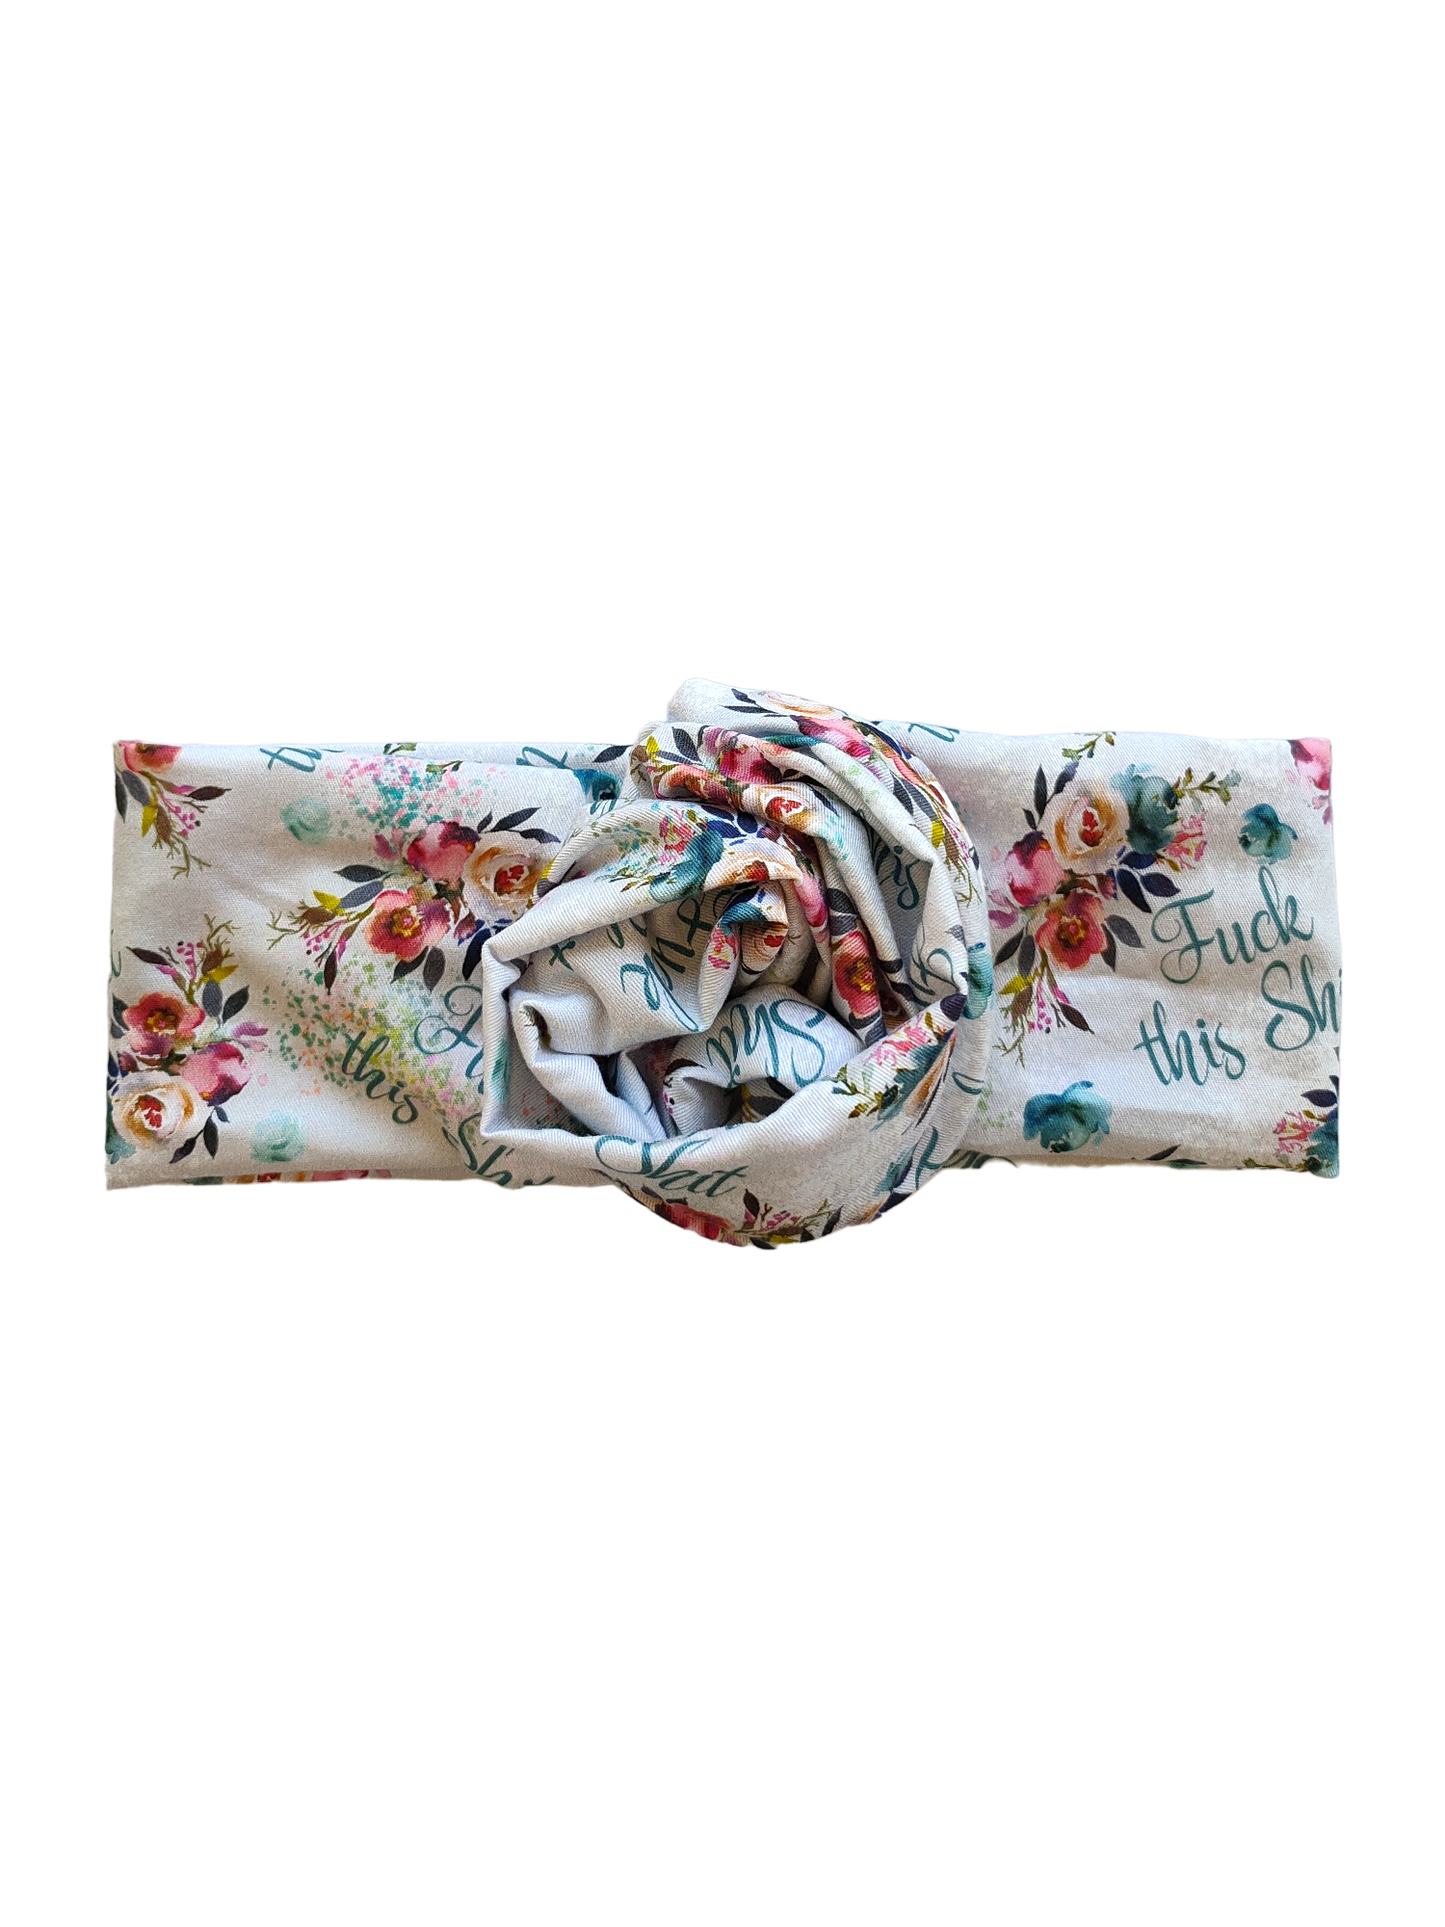 BETTY BOO BANDS™ WIRED HEADWRAP | 18+ Swear Band | Blue F*ck this Sh*t Florals